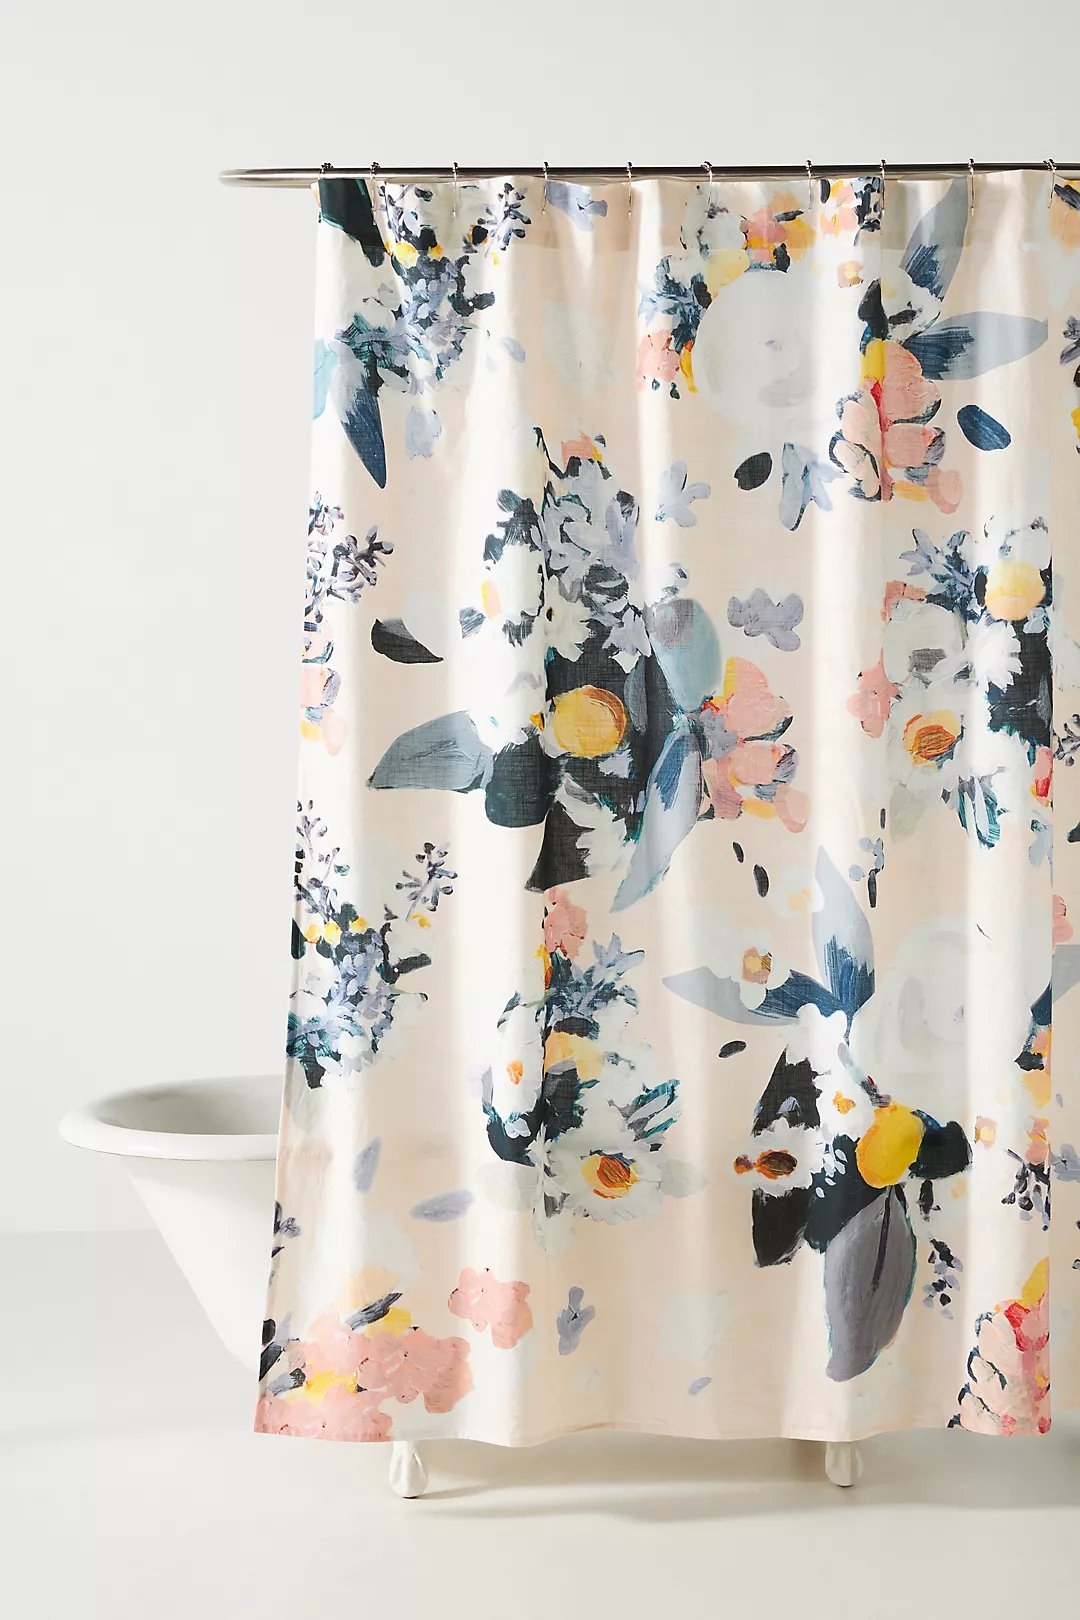 Botanica Shower Curtain By Anthropologie in Pink Size 72 X 72 - Image 0